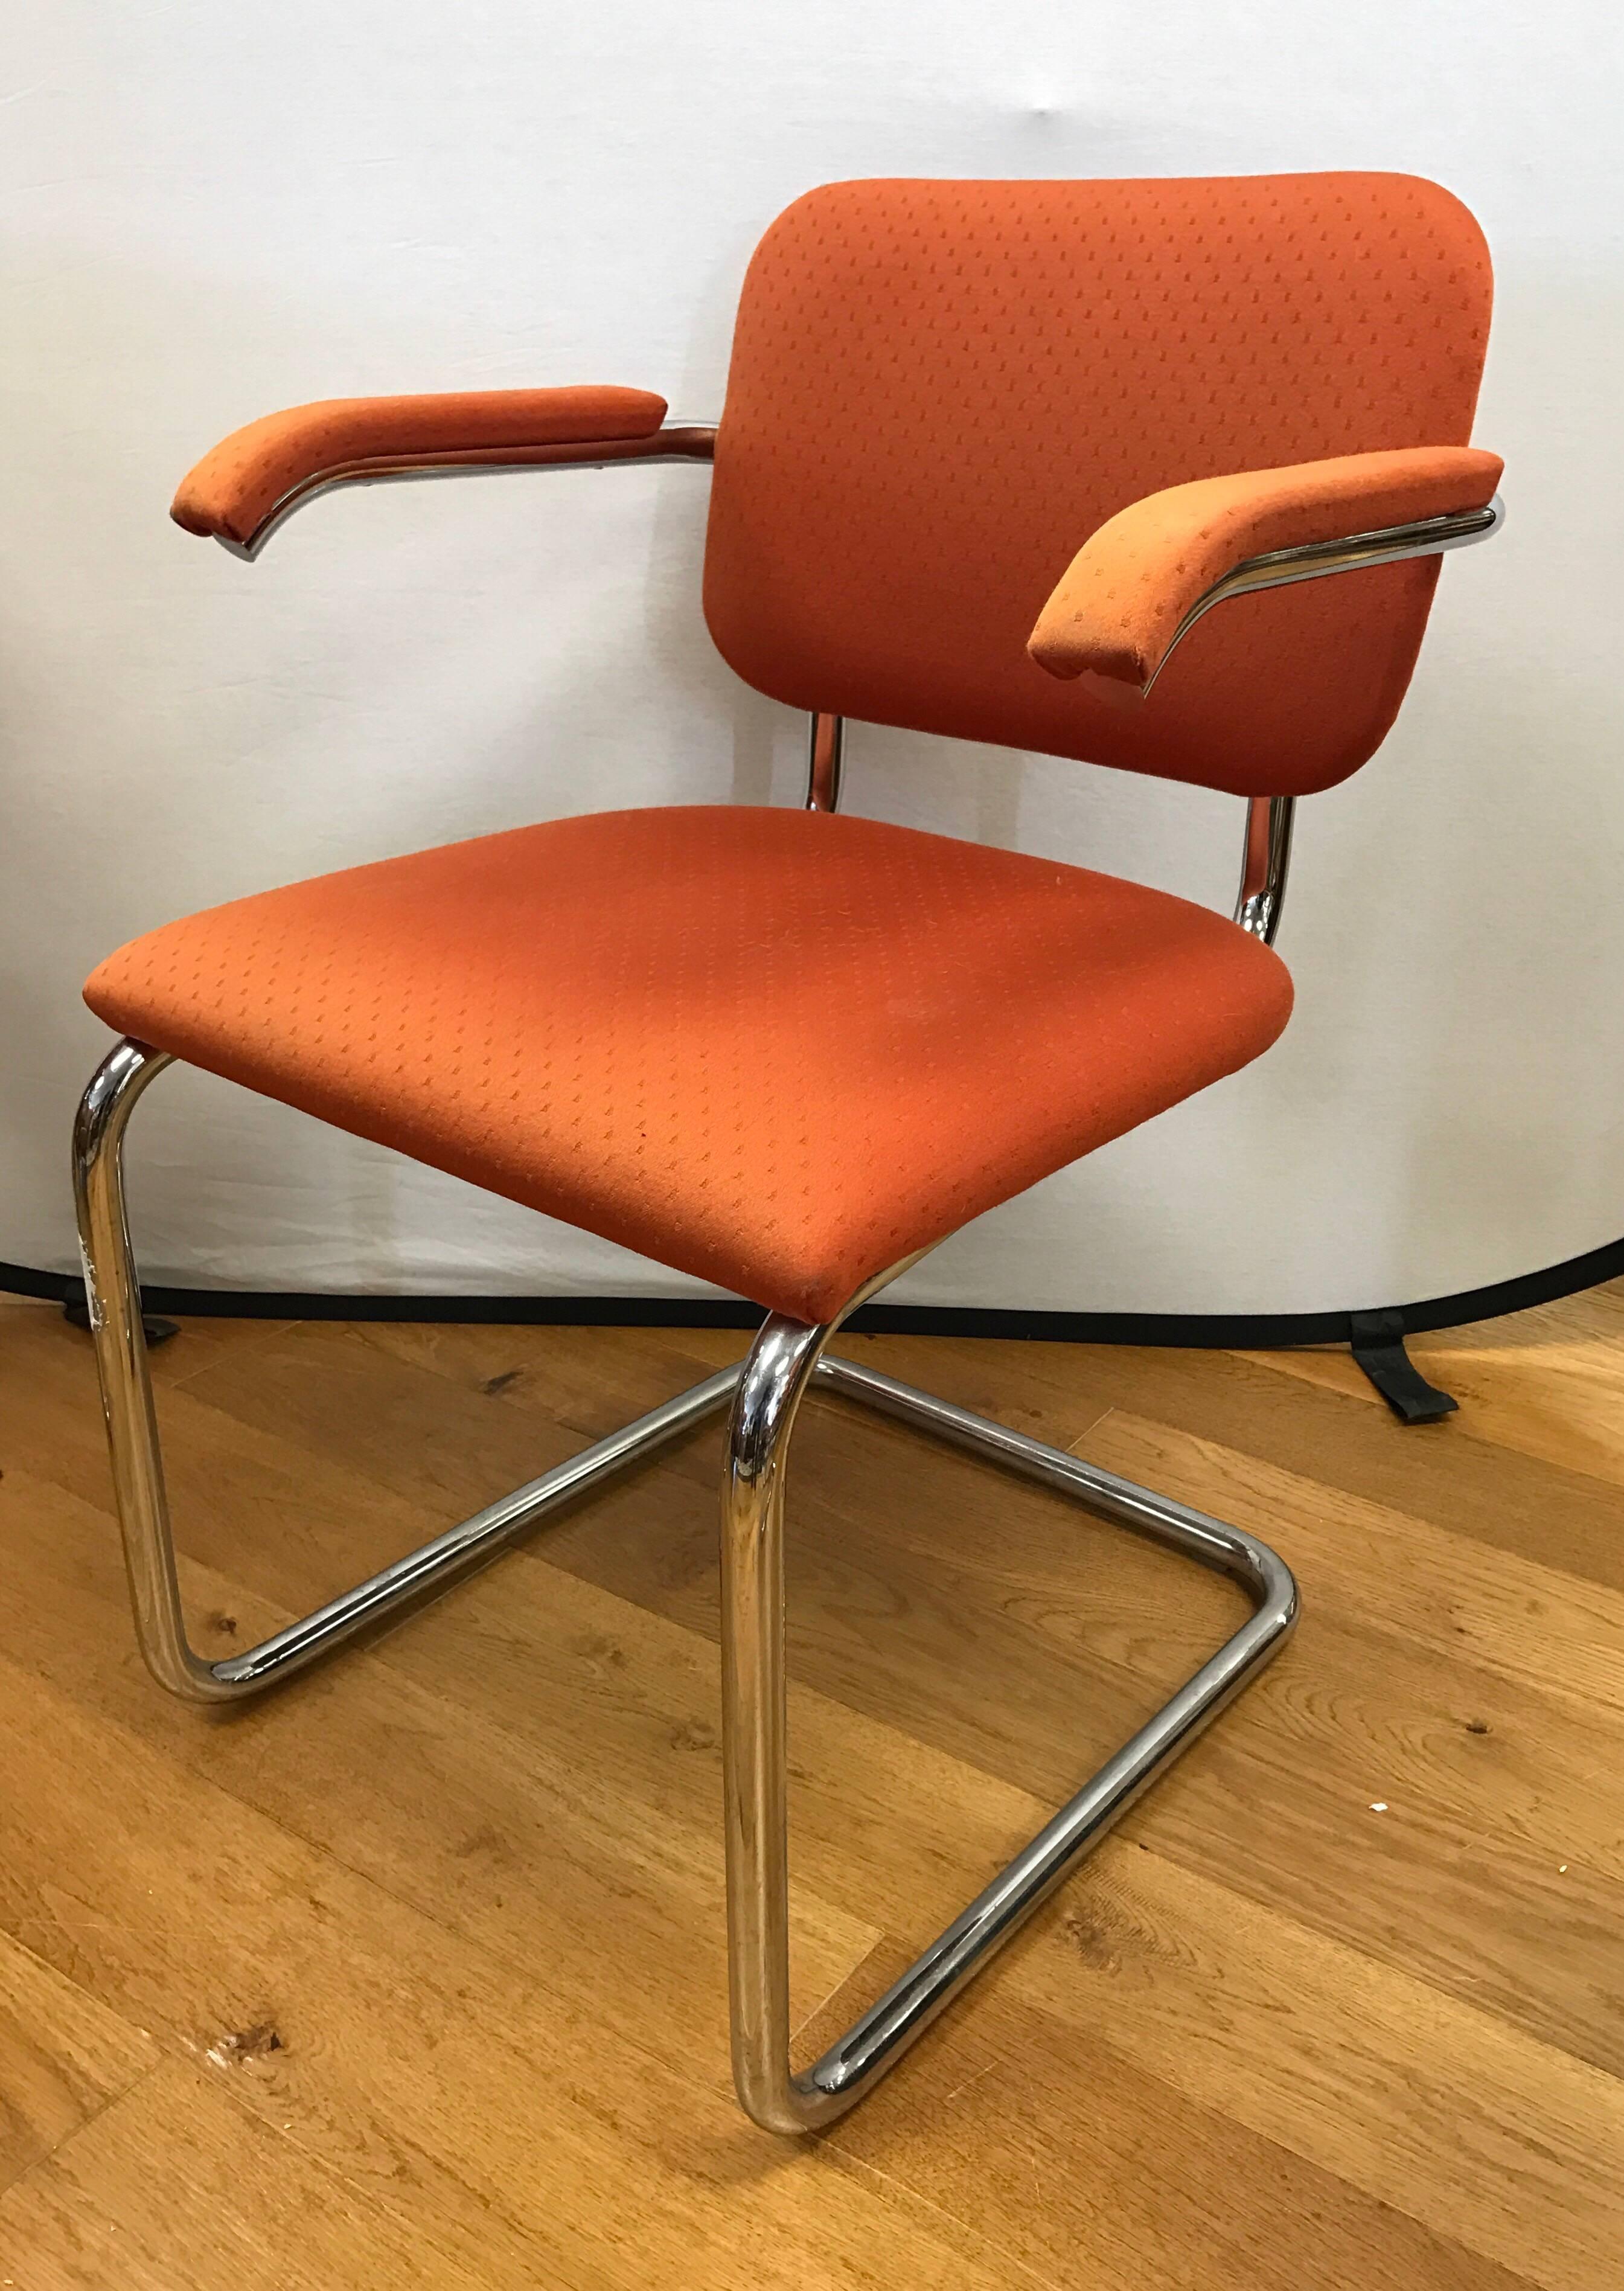 Set of three armchairs by Knoll featuring sleekly designed chrome cantilever frames. Two of the chairs need cleaning or reupholstering.